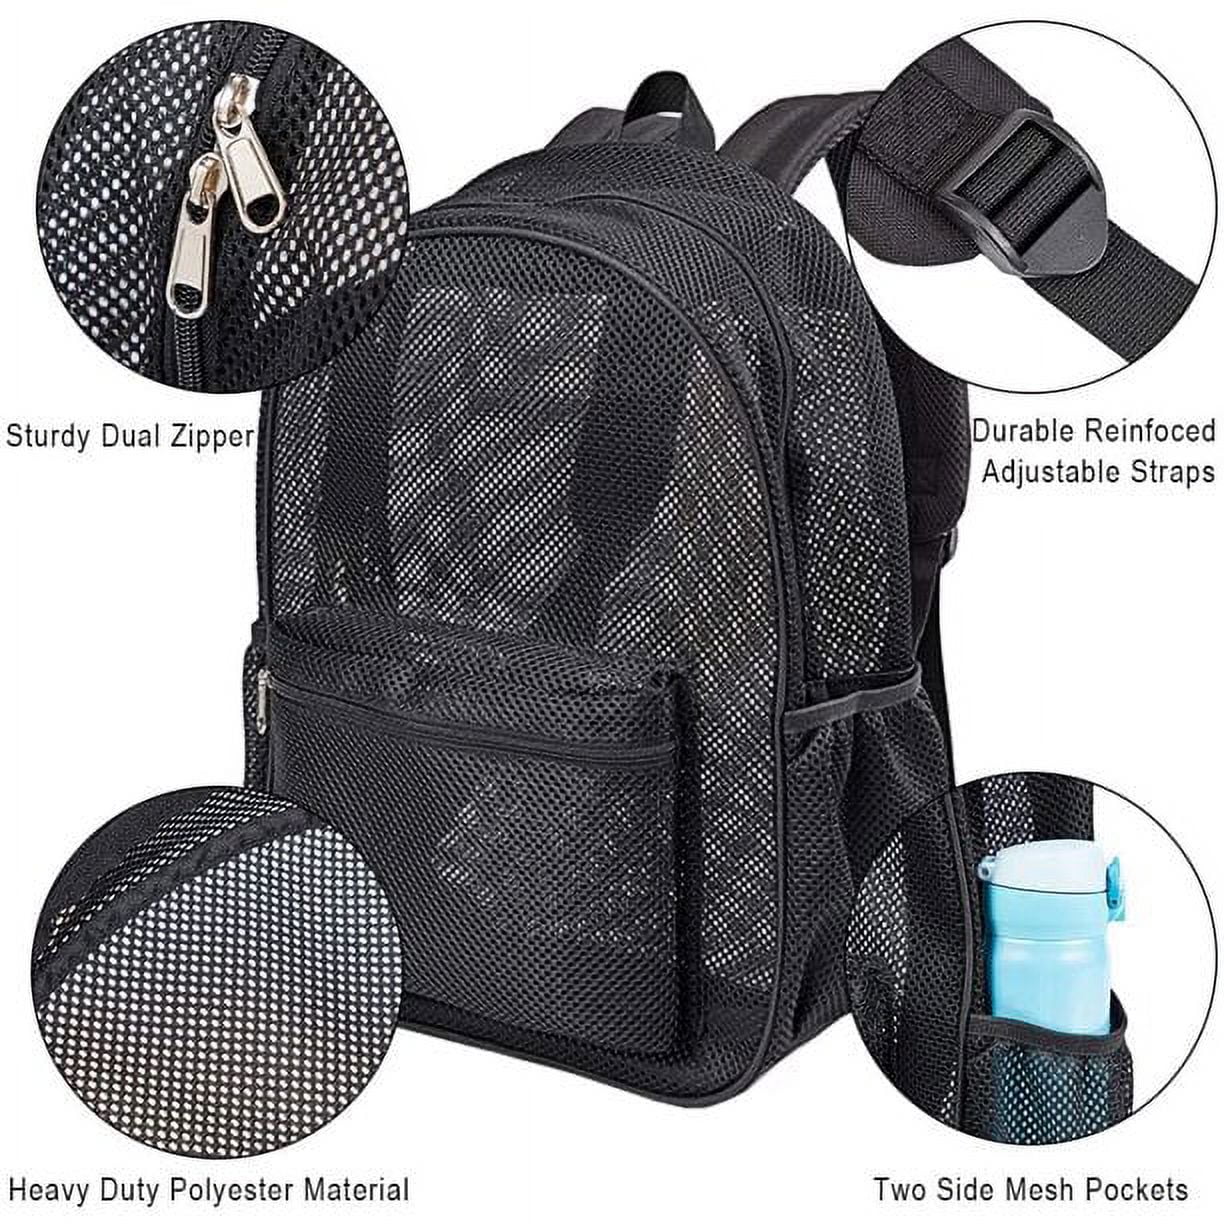 Mesh Backpack Heavy Duty Student Net Bookbag Quality Simple Netting School  Bag Security See Through Daypack White